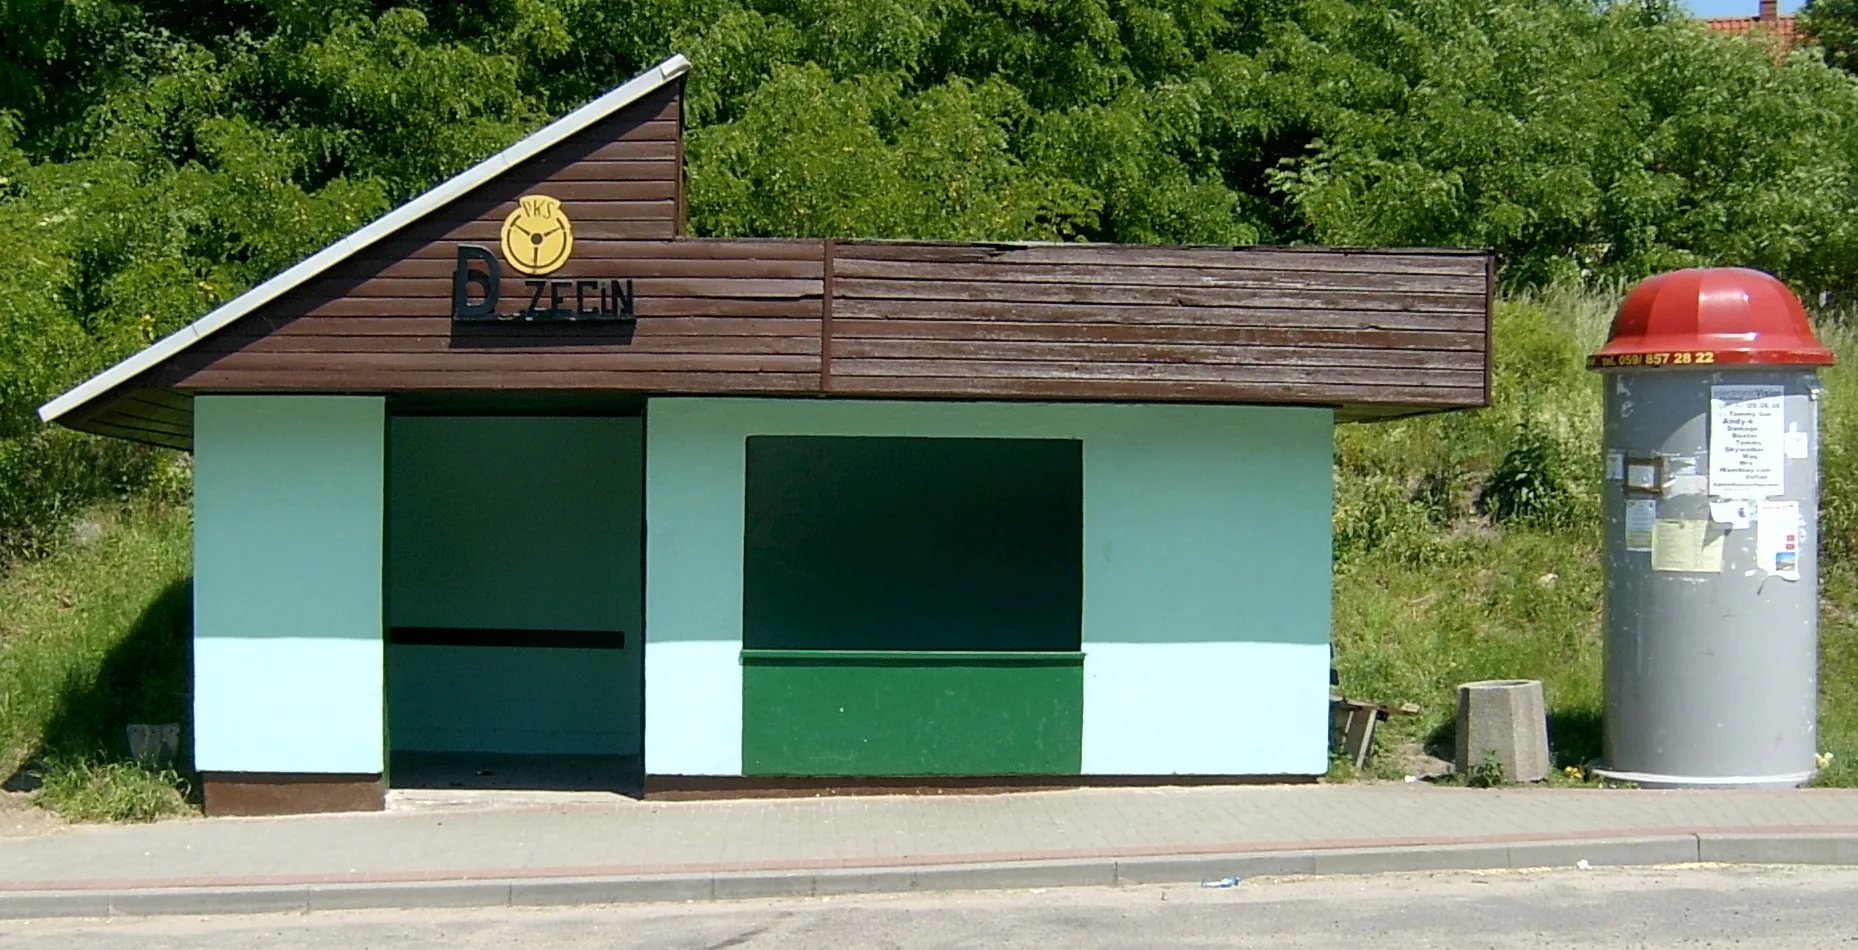 Photo showing: A bus stop in Drzecin, in the Słubice commune, in the Lubuskie Voivodeship of Poland.